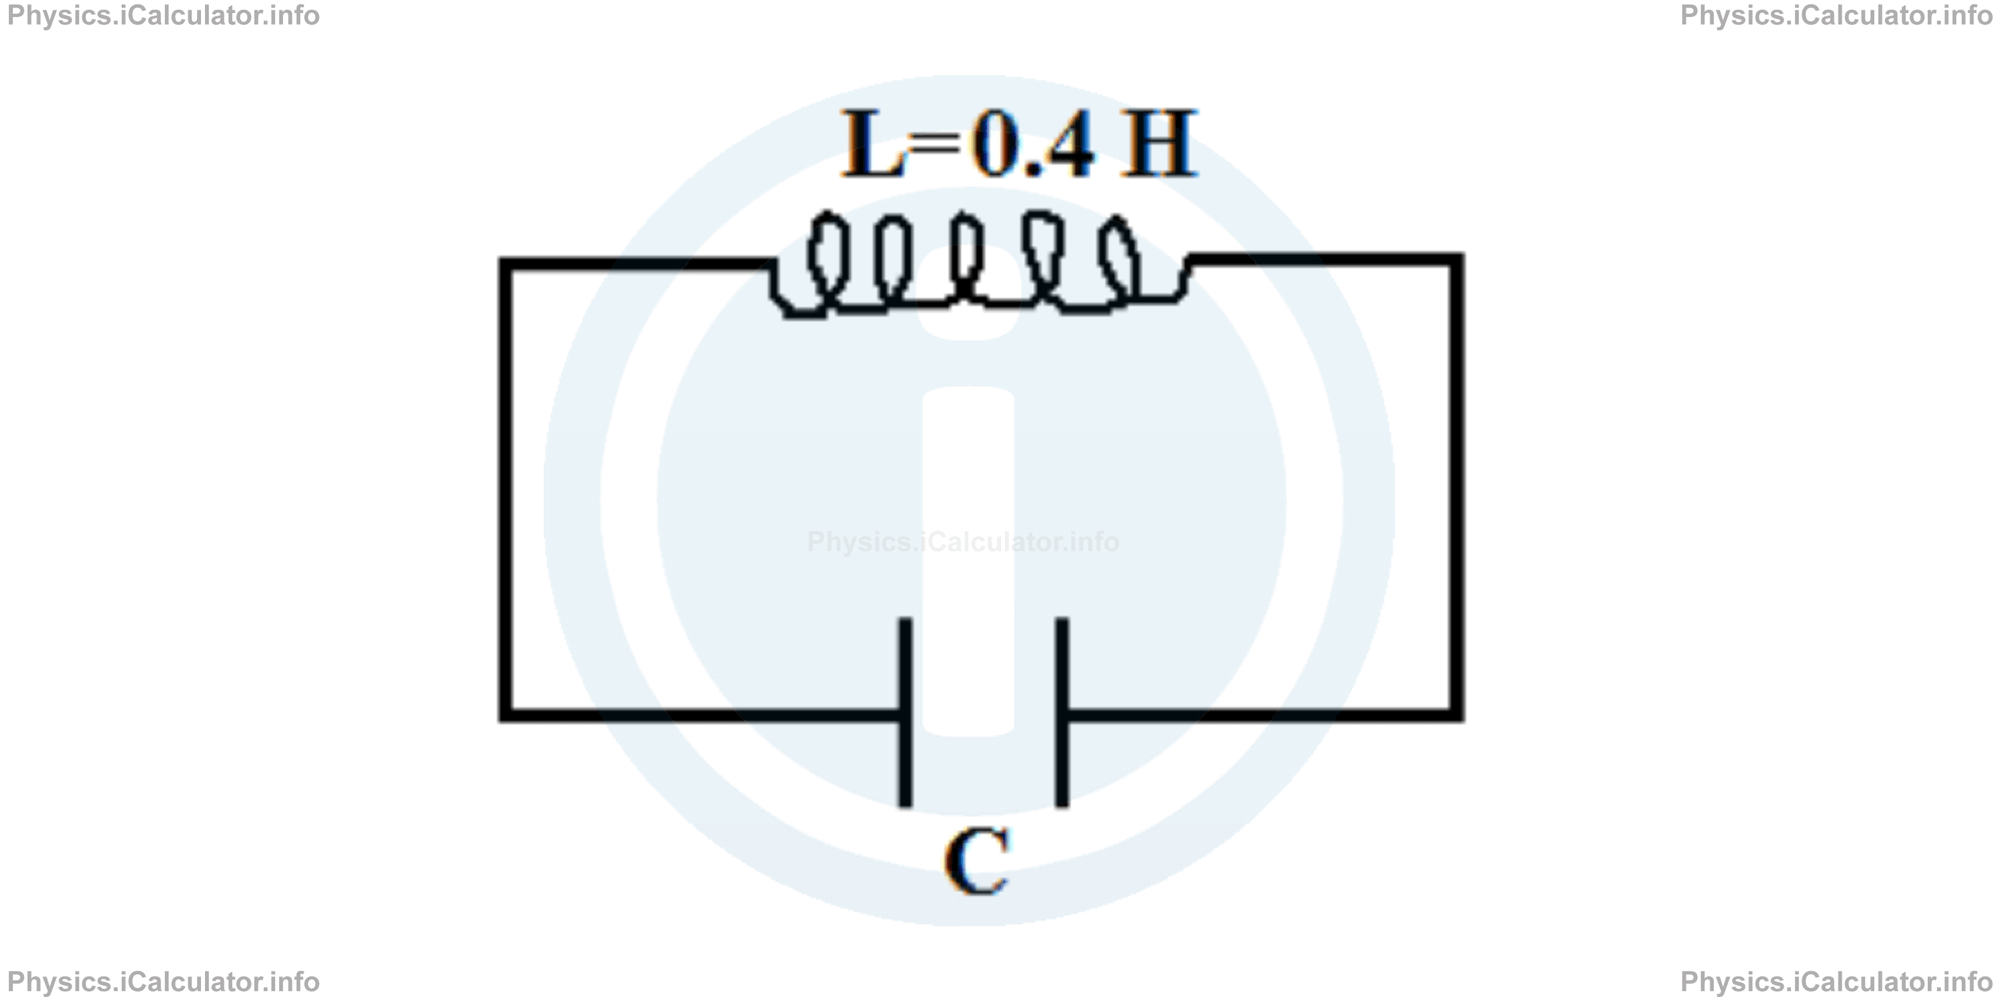 Physics Tutorials: This image provides visual information for the physics tutorial Alternating Current. LC Circuits 